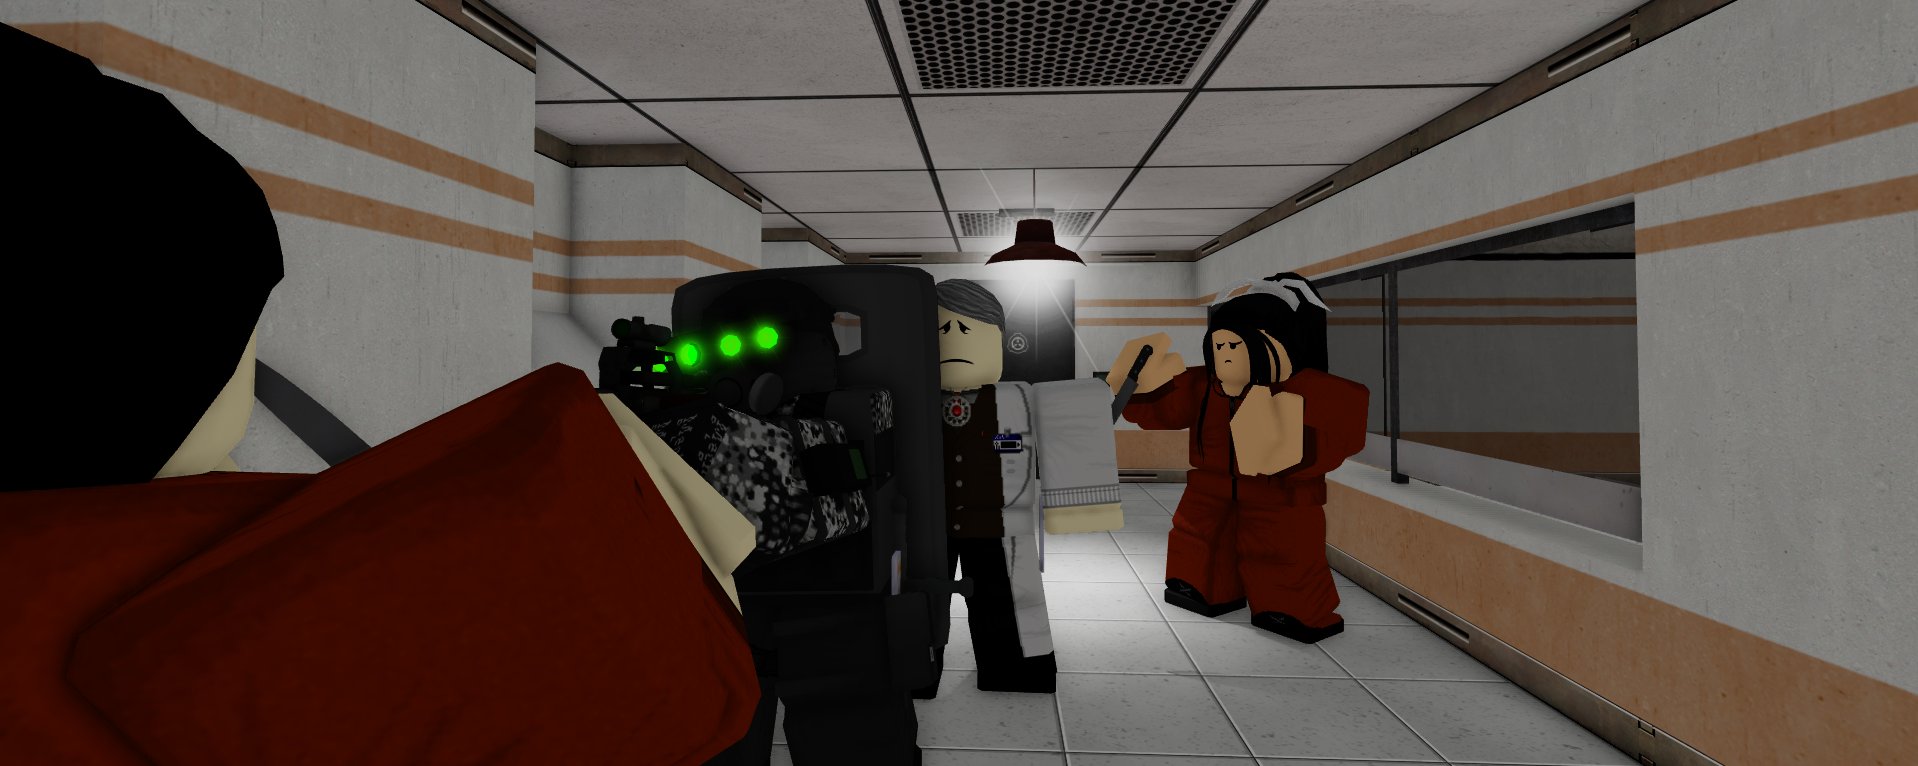 S.C.P. Site-19 Roleplay - Roblox